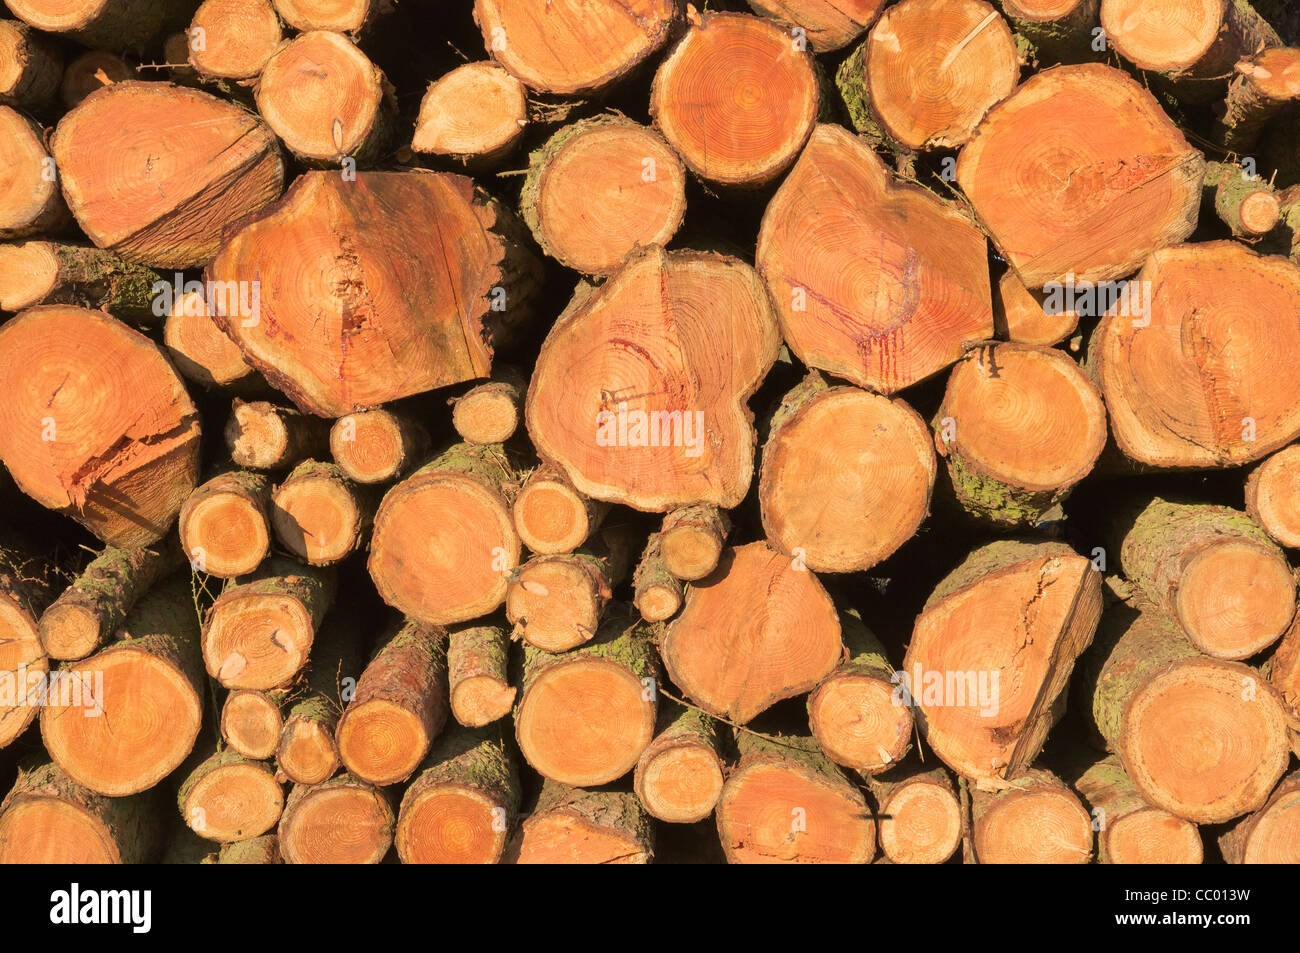 Forestry timber. Stock Photo